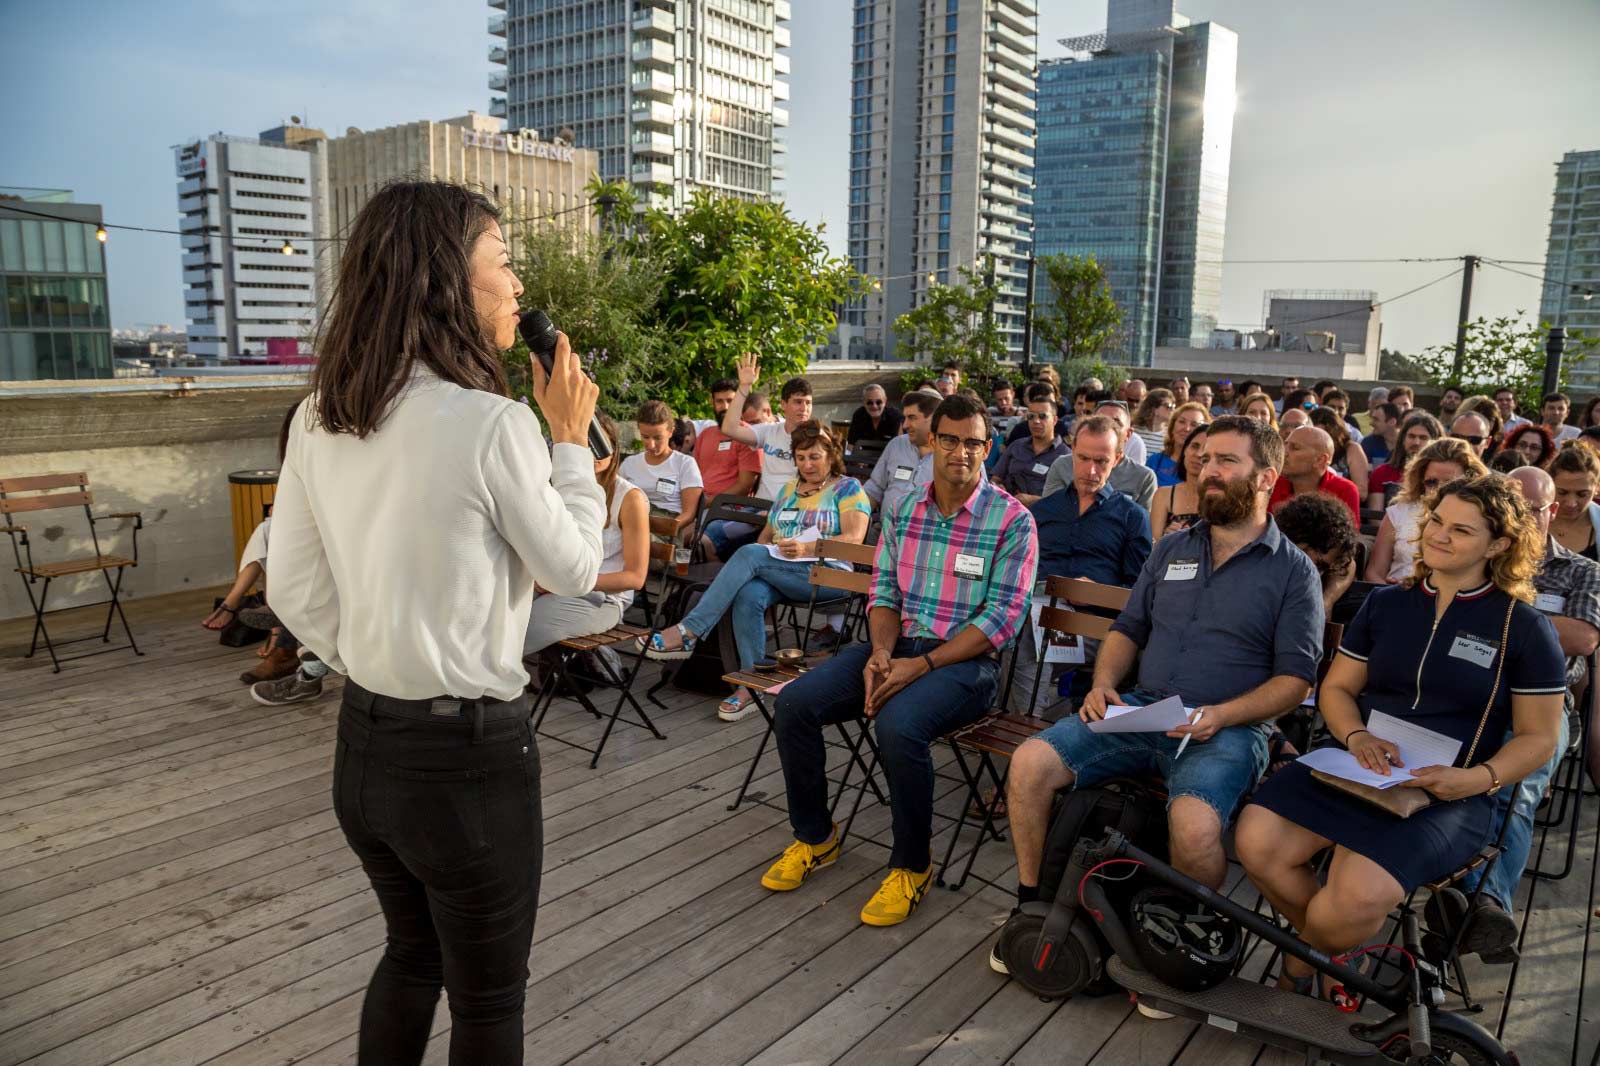 Dana zelicha OWBA founder at a rooftop speaking event in front of a large audience